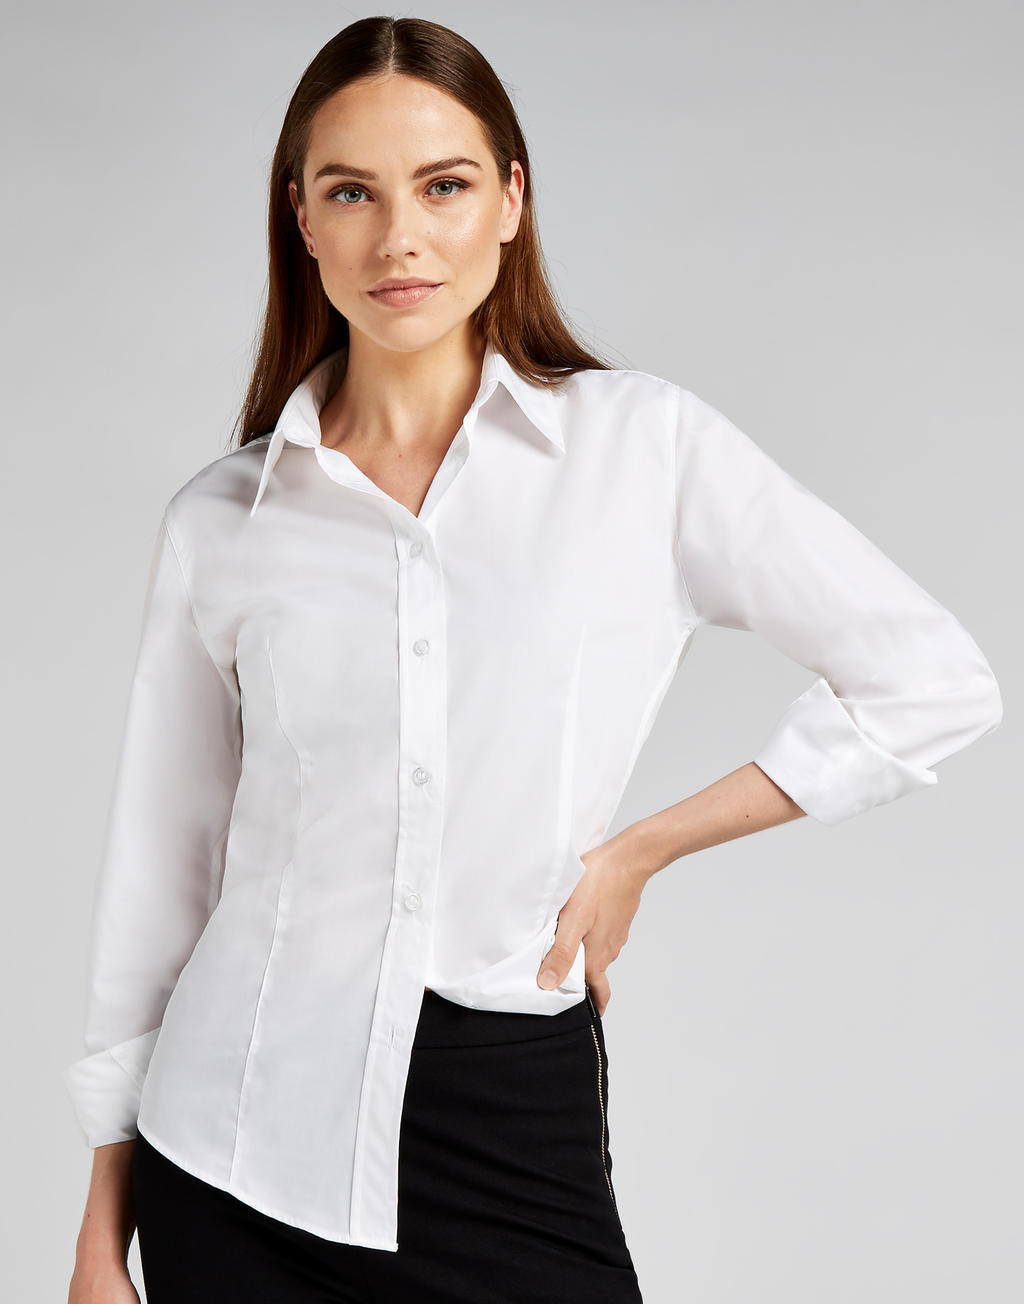  Womens Classic Fit Workforce Shirt in Farbe White